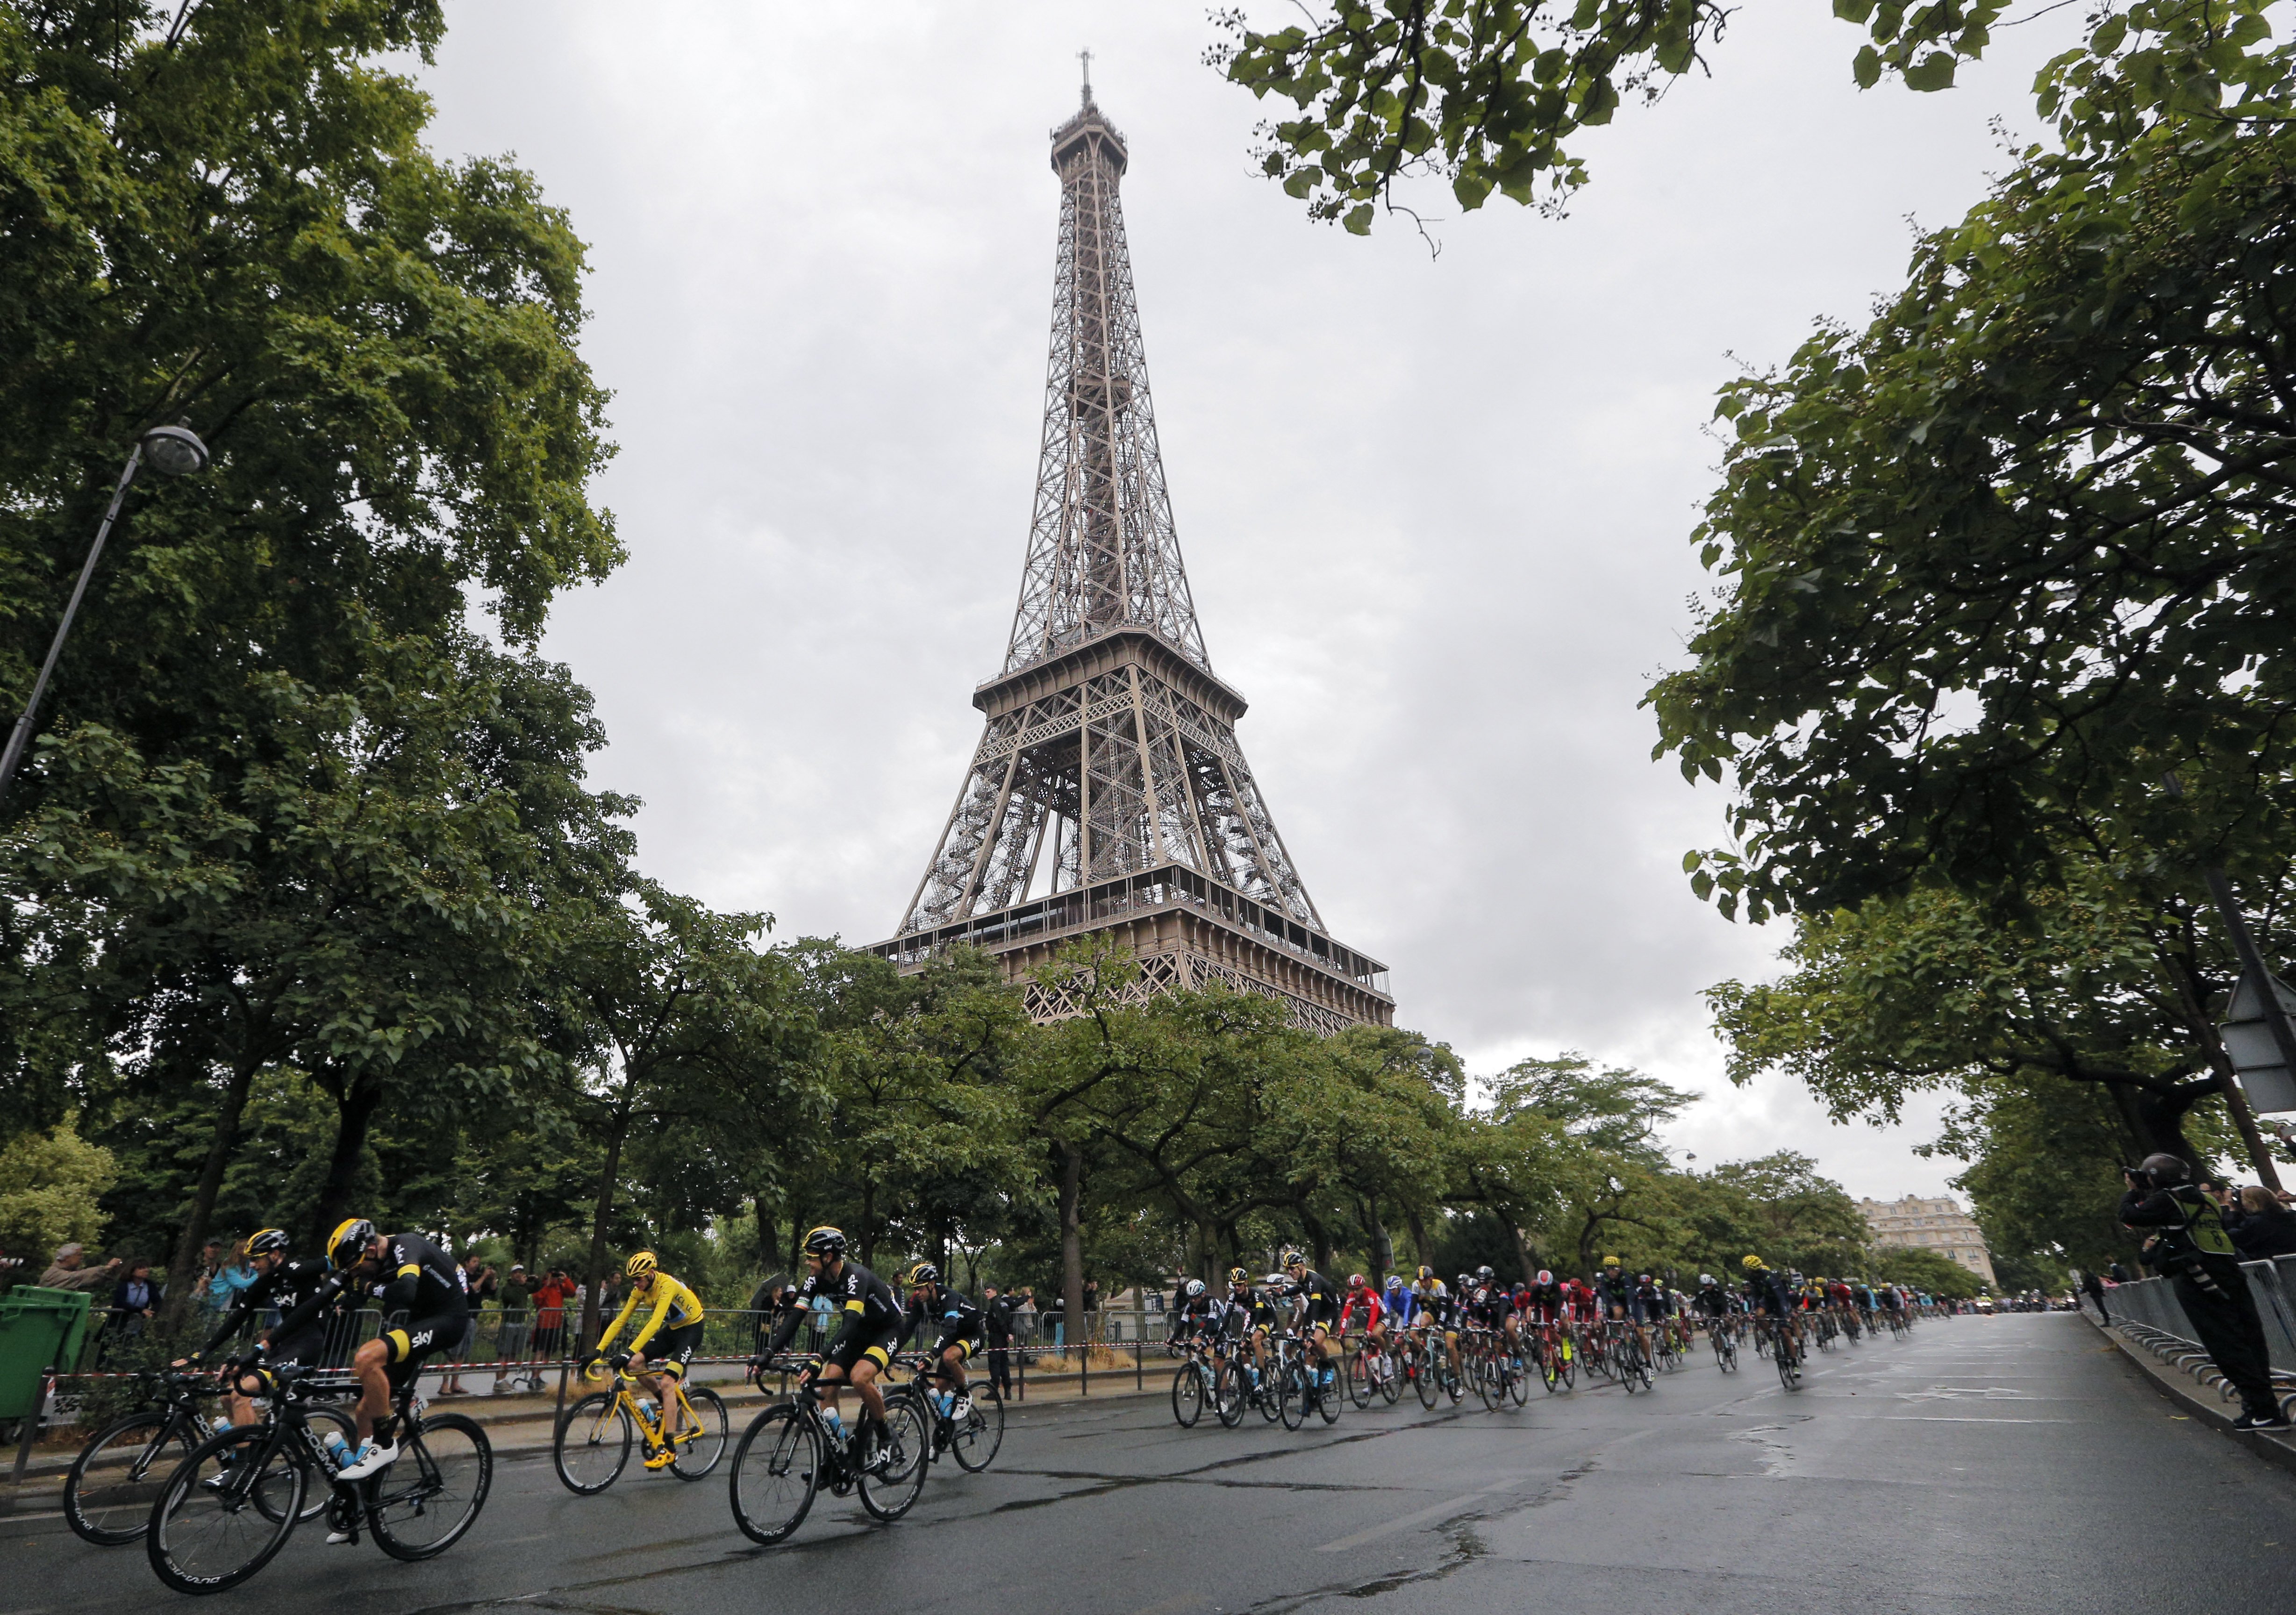 Chris Froome rides past the Eiffel Tower. Photo: AP